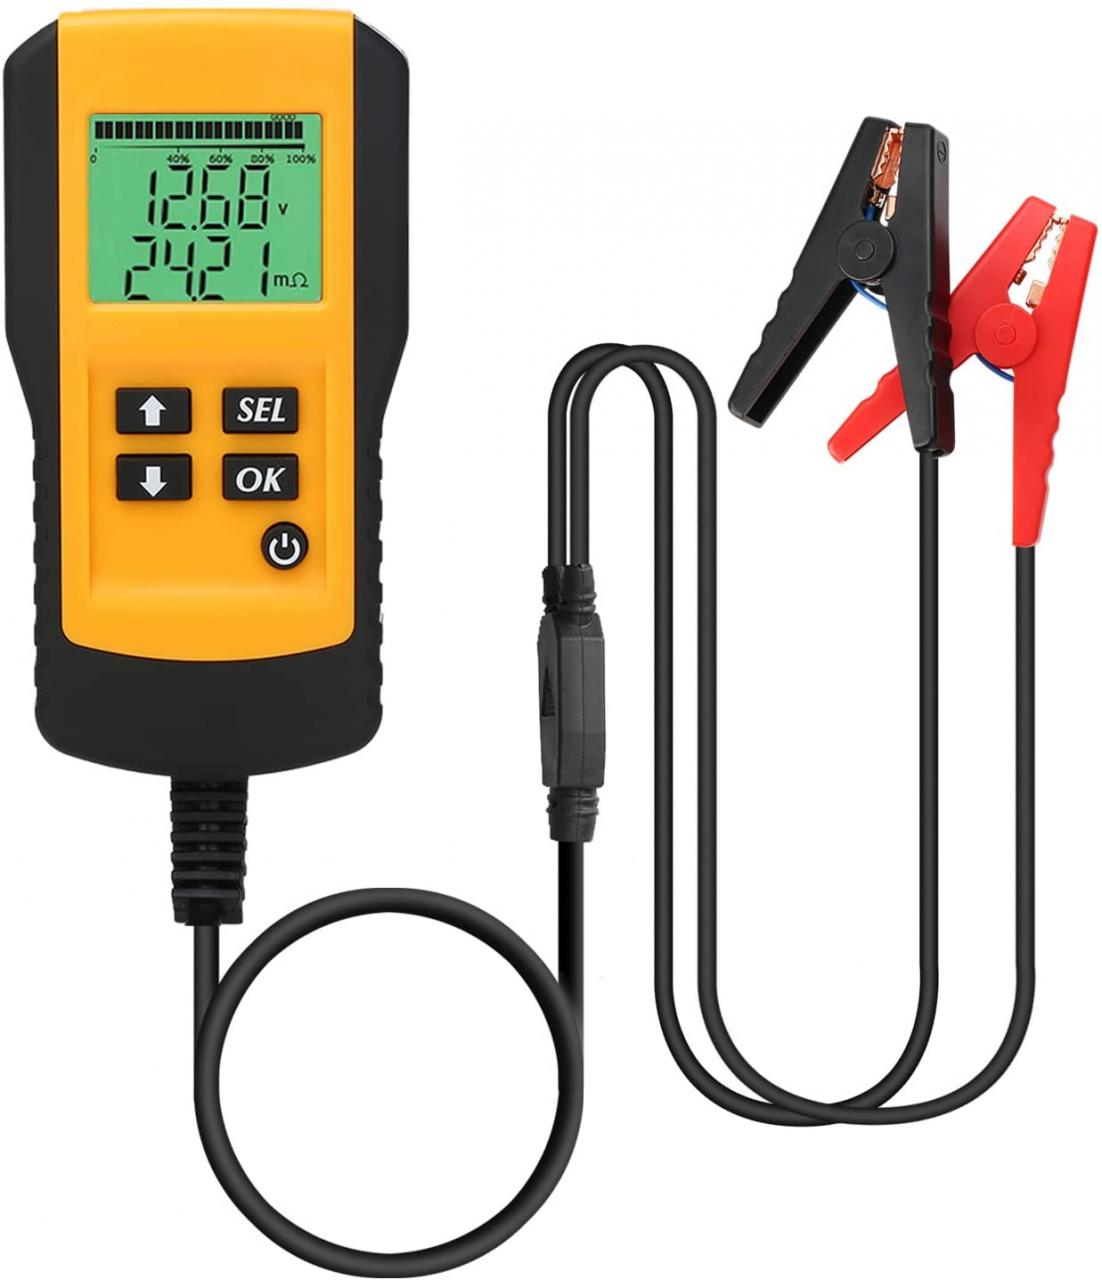 SUNER POWER Digital 12V Car Battery Tester Automotive Battery Load Tester  and Analyzer of Battery Life Percentage,Voltage, Resistance and CCA Value  for Flood, Gel, AGM, Deep Cycle Battery : Amazon.co.uk: Automotive